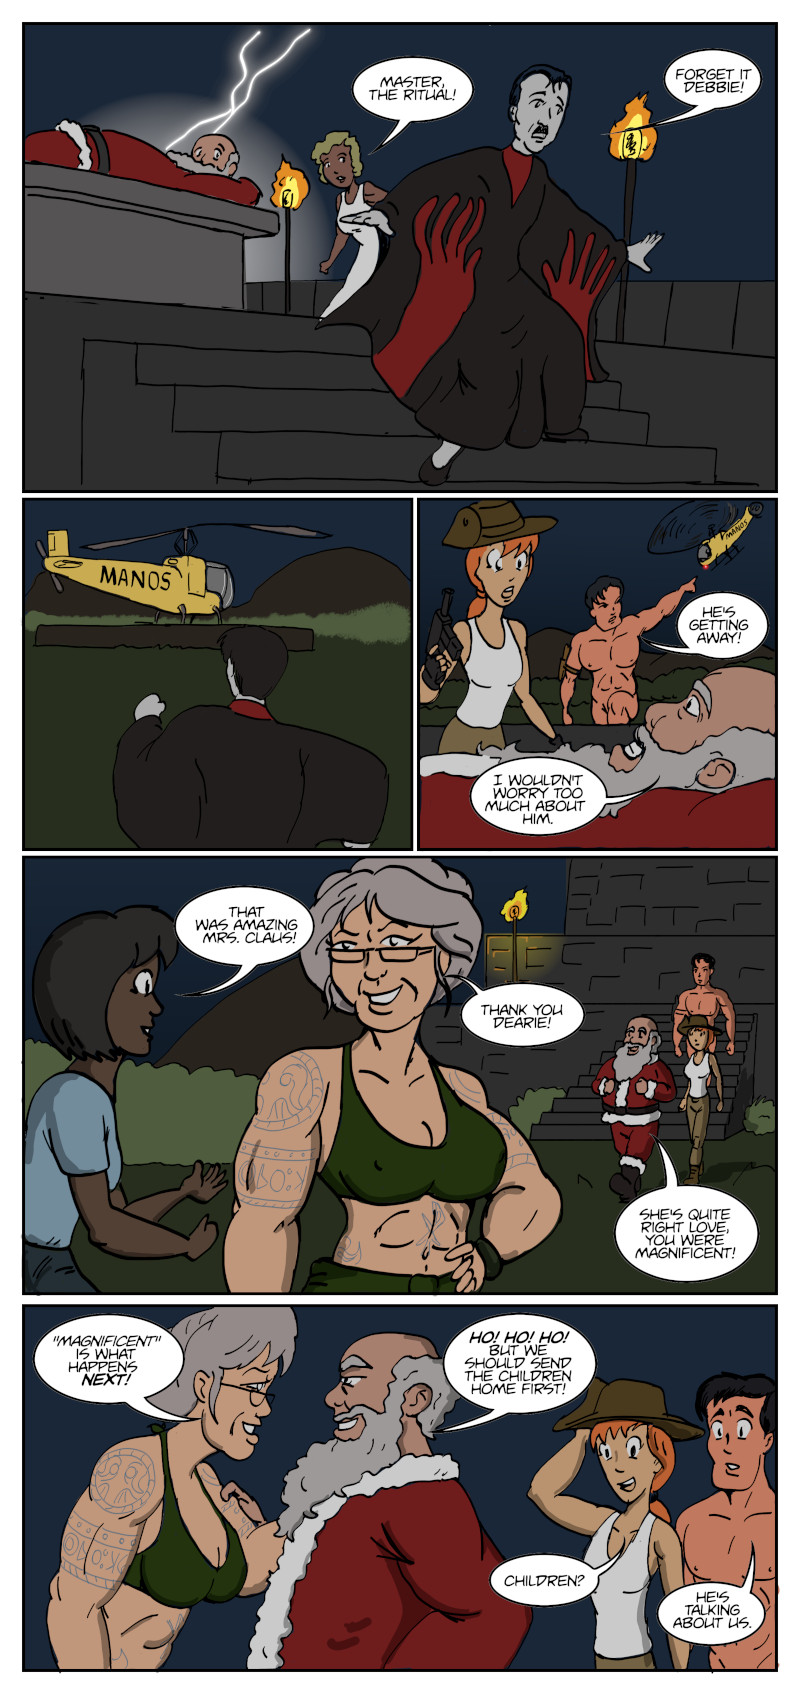 Pine Hill Creature Feature by Jay042 Page 6 of 7